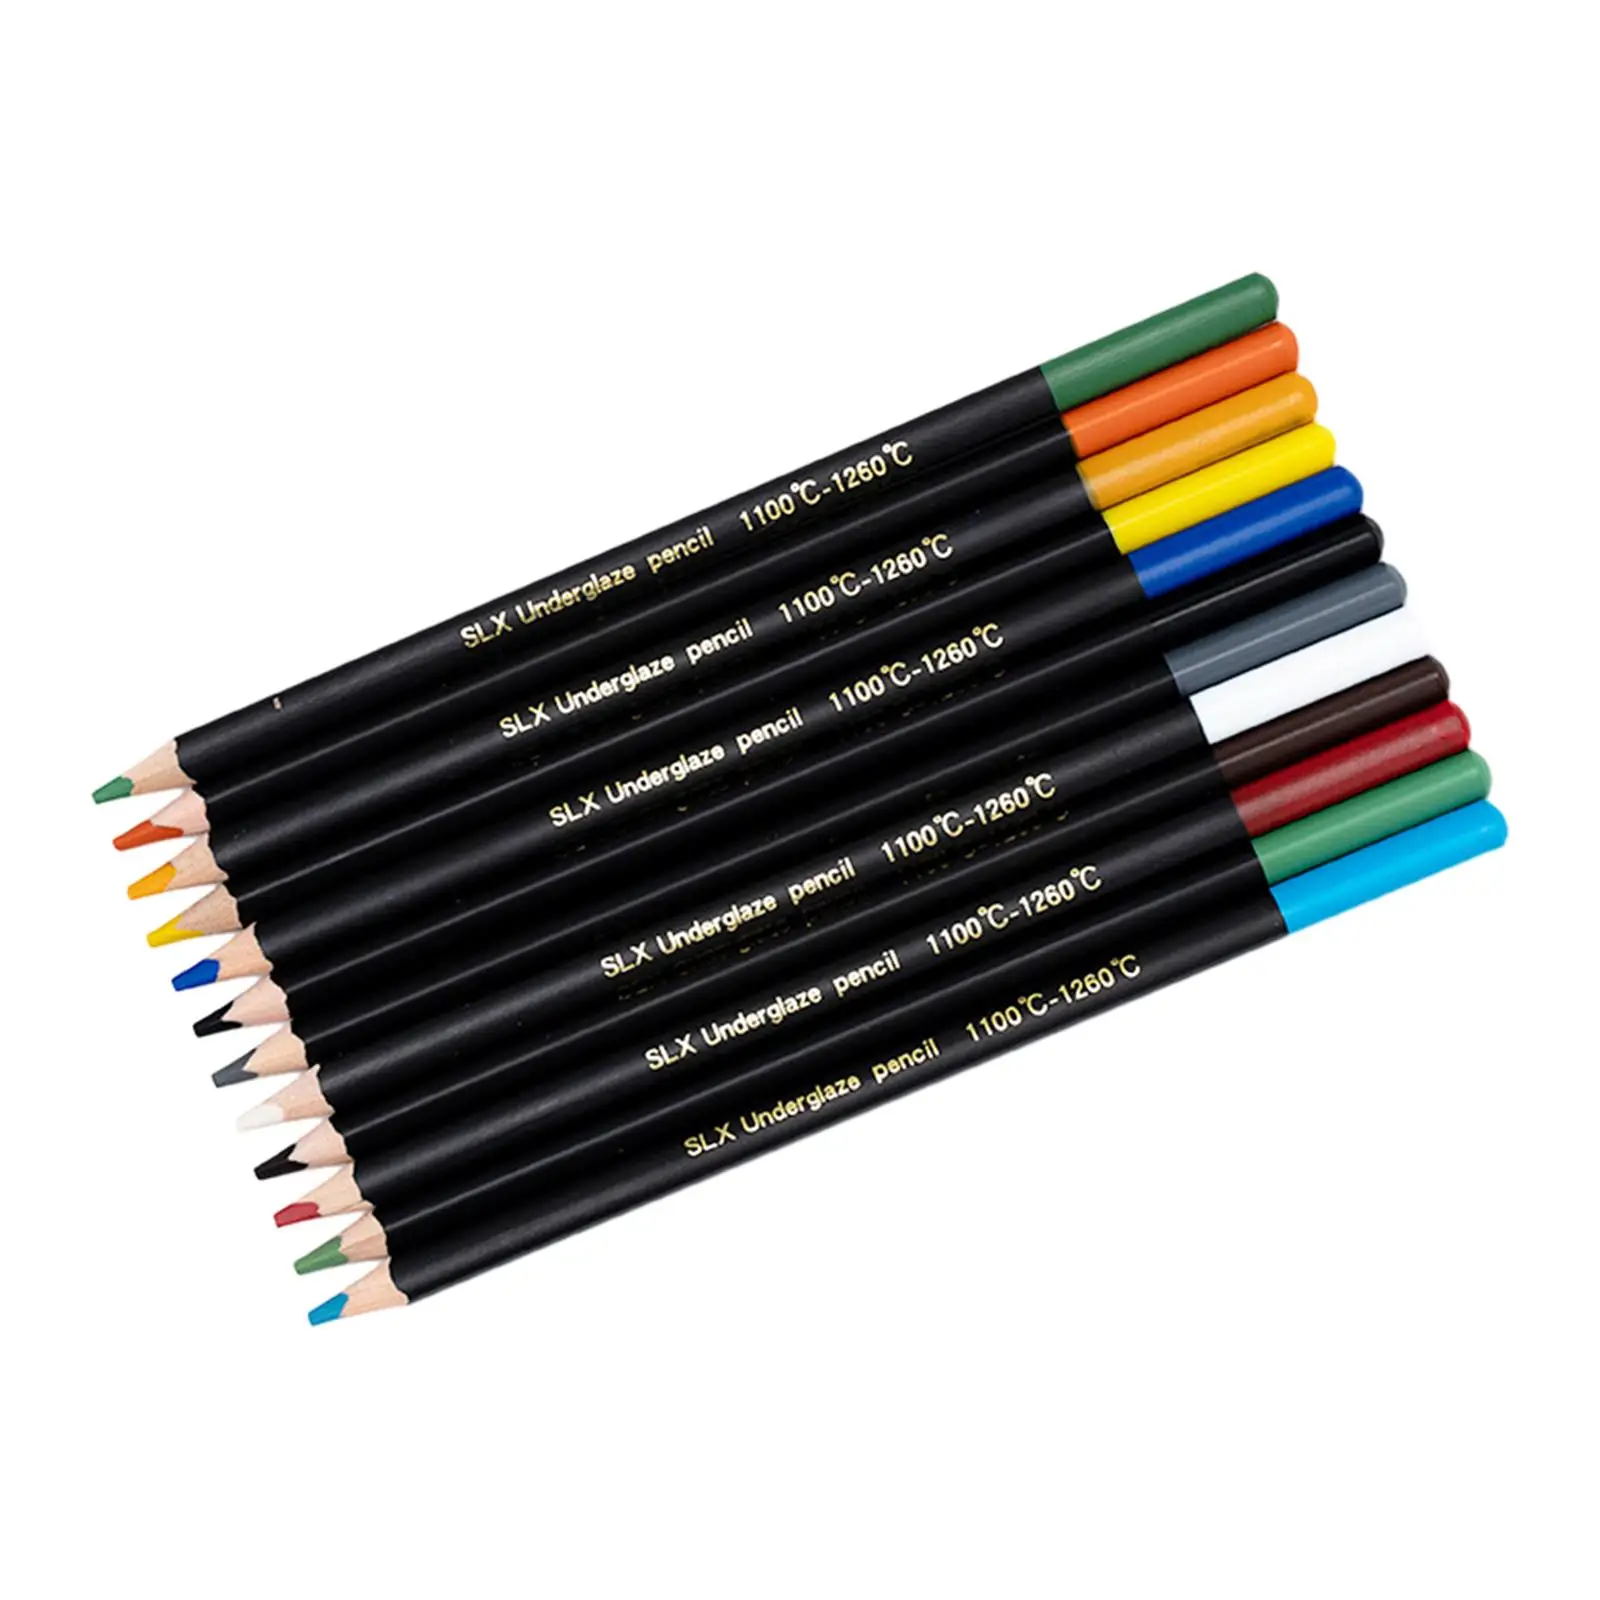 Colored Pencils Professional 12 Count Drawing Pencils Coloring Pencils Set for Coloring Books Art Supplies Artist Shading Gift